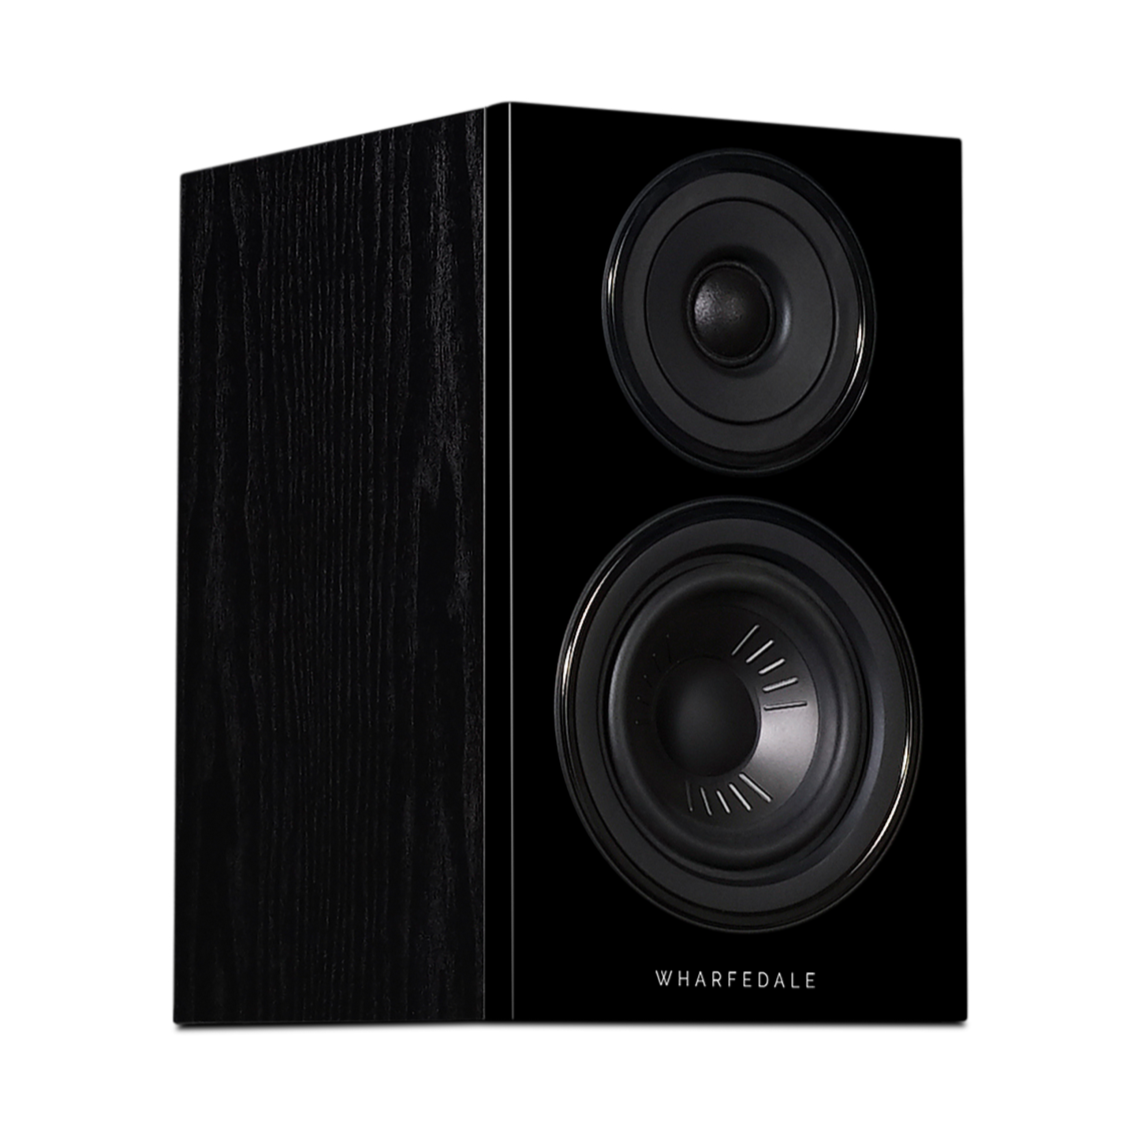 Still compact but with increased cabinet volume and driver size for even more potency, the Wharfedale DIAMOND 12.2 offers a little more from a traditional standmount (or bookshelf) speaker format and embodies the history and performance values of the Wharfedale DIAMOND series.